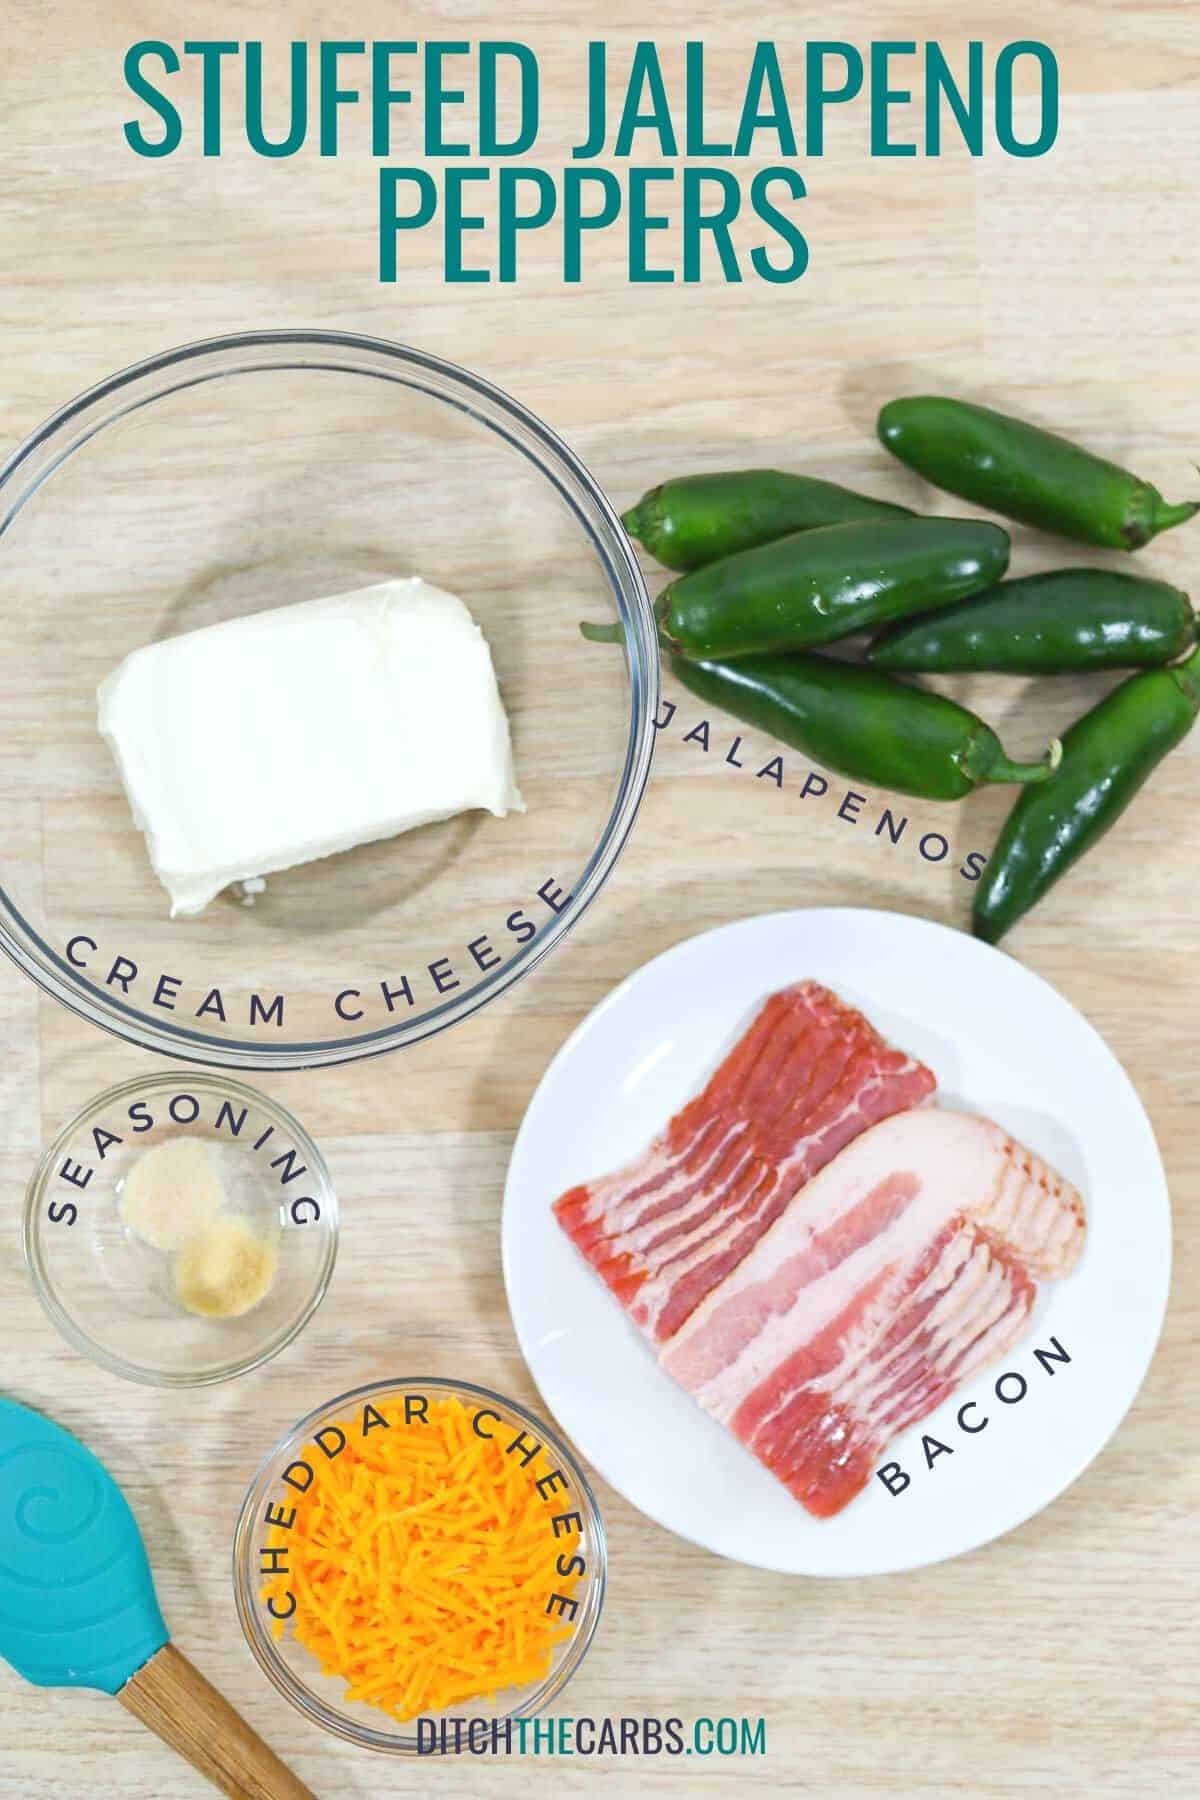 Ingredients for cream cheese stuffed jalapeno peppers: peppers, cream cheese, bacon, cheddar cheese and seasoning. 